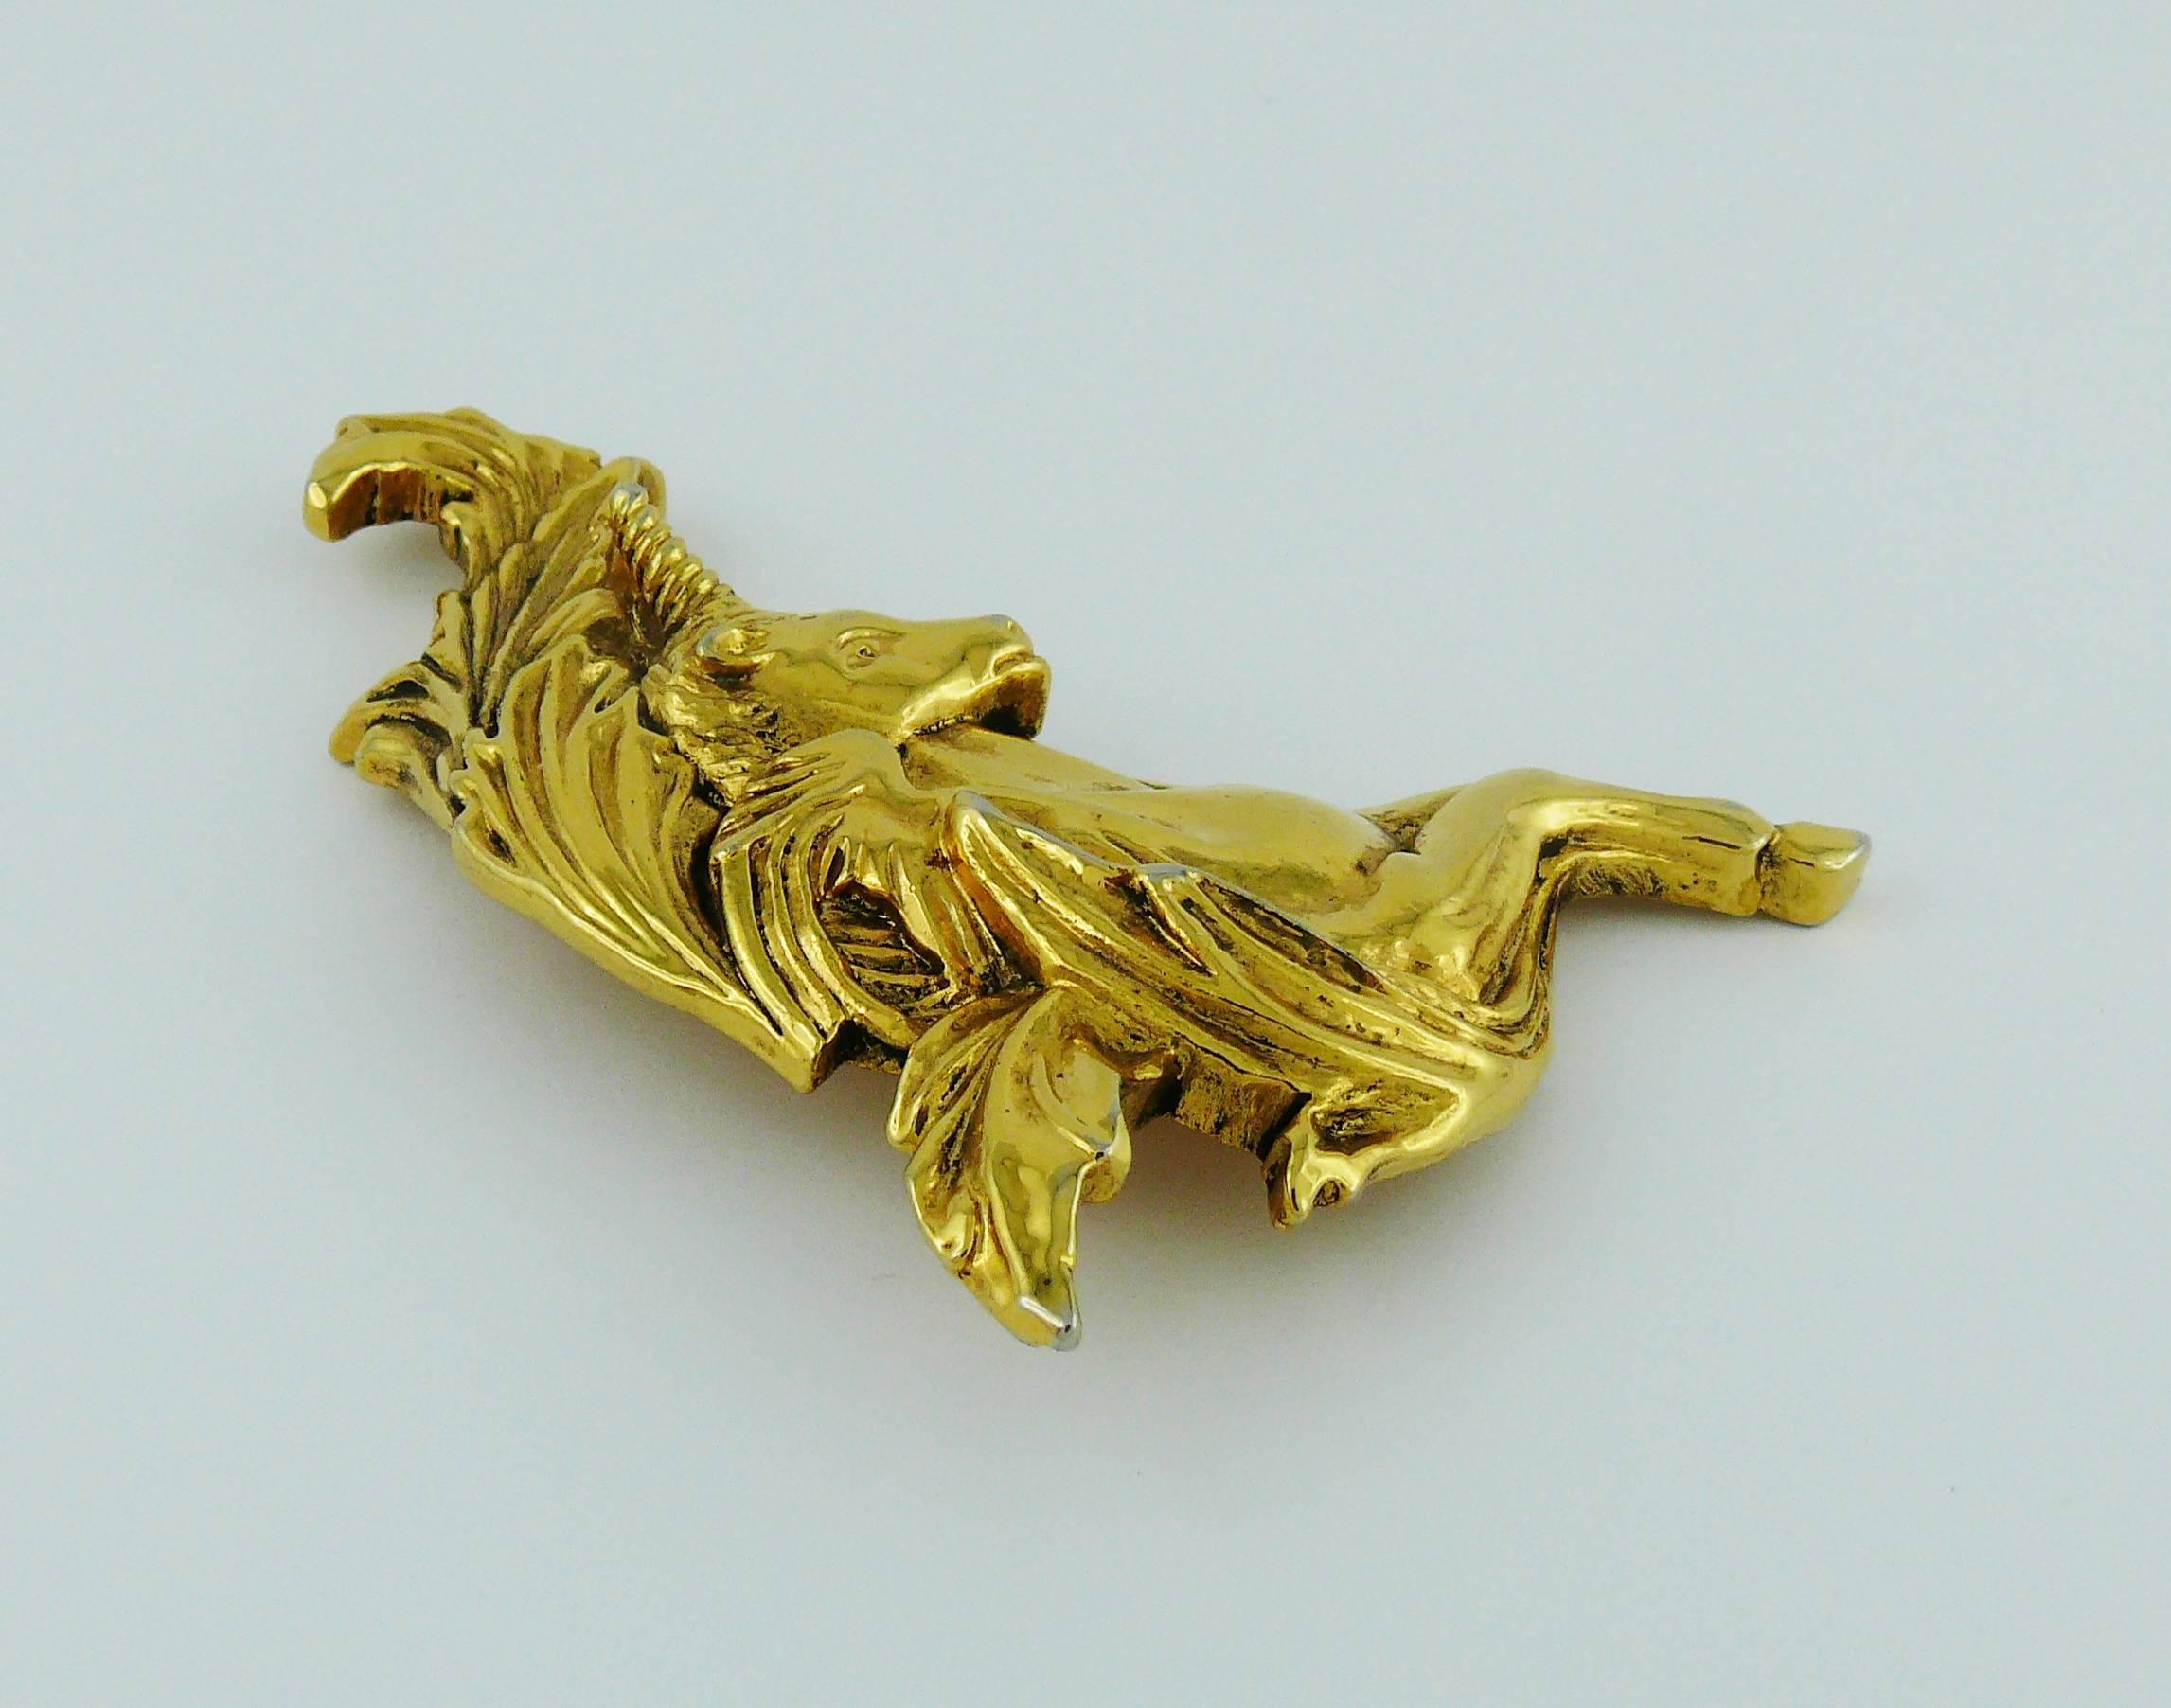 GEORGES RECH Paris vintage gold toned large unicorn brooch.

Embossed G. RECH Paris.

Indicative measurements : max. height approx. 8.4 cm (3.31 inches) / max. width approx. 4.5 cm (1.77 inches).

JEWELRY CONDITION CHART
- New or never worn : item